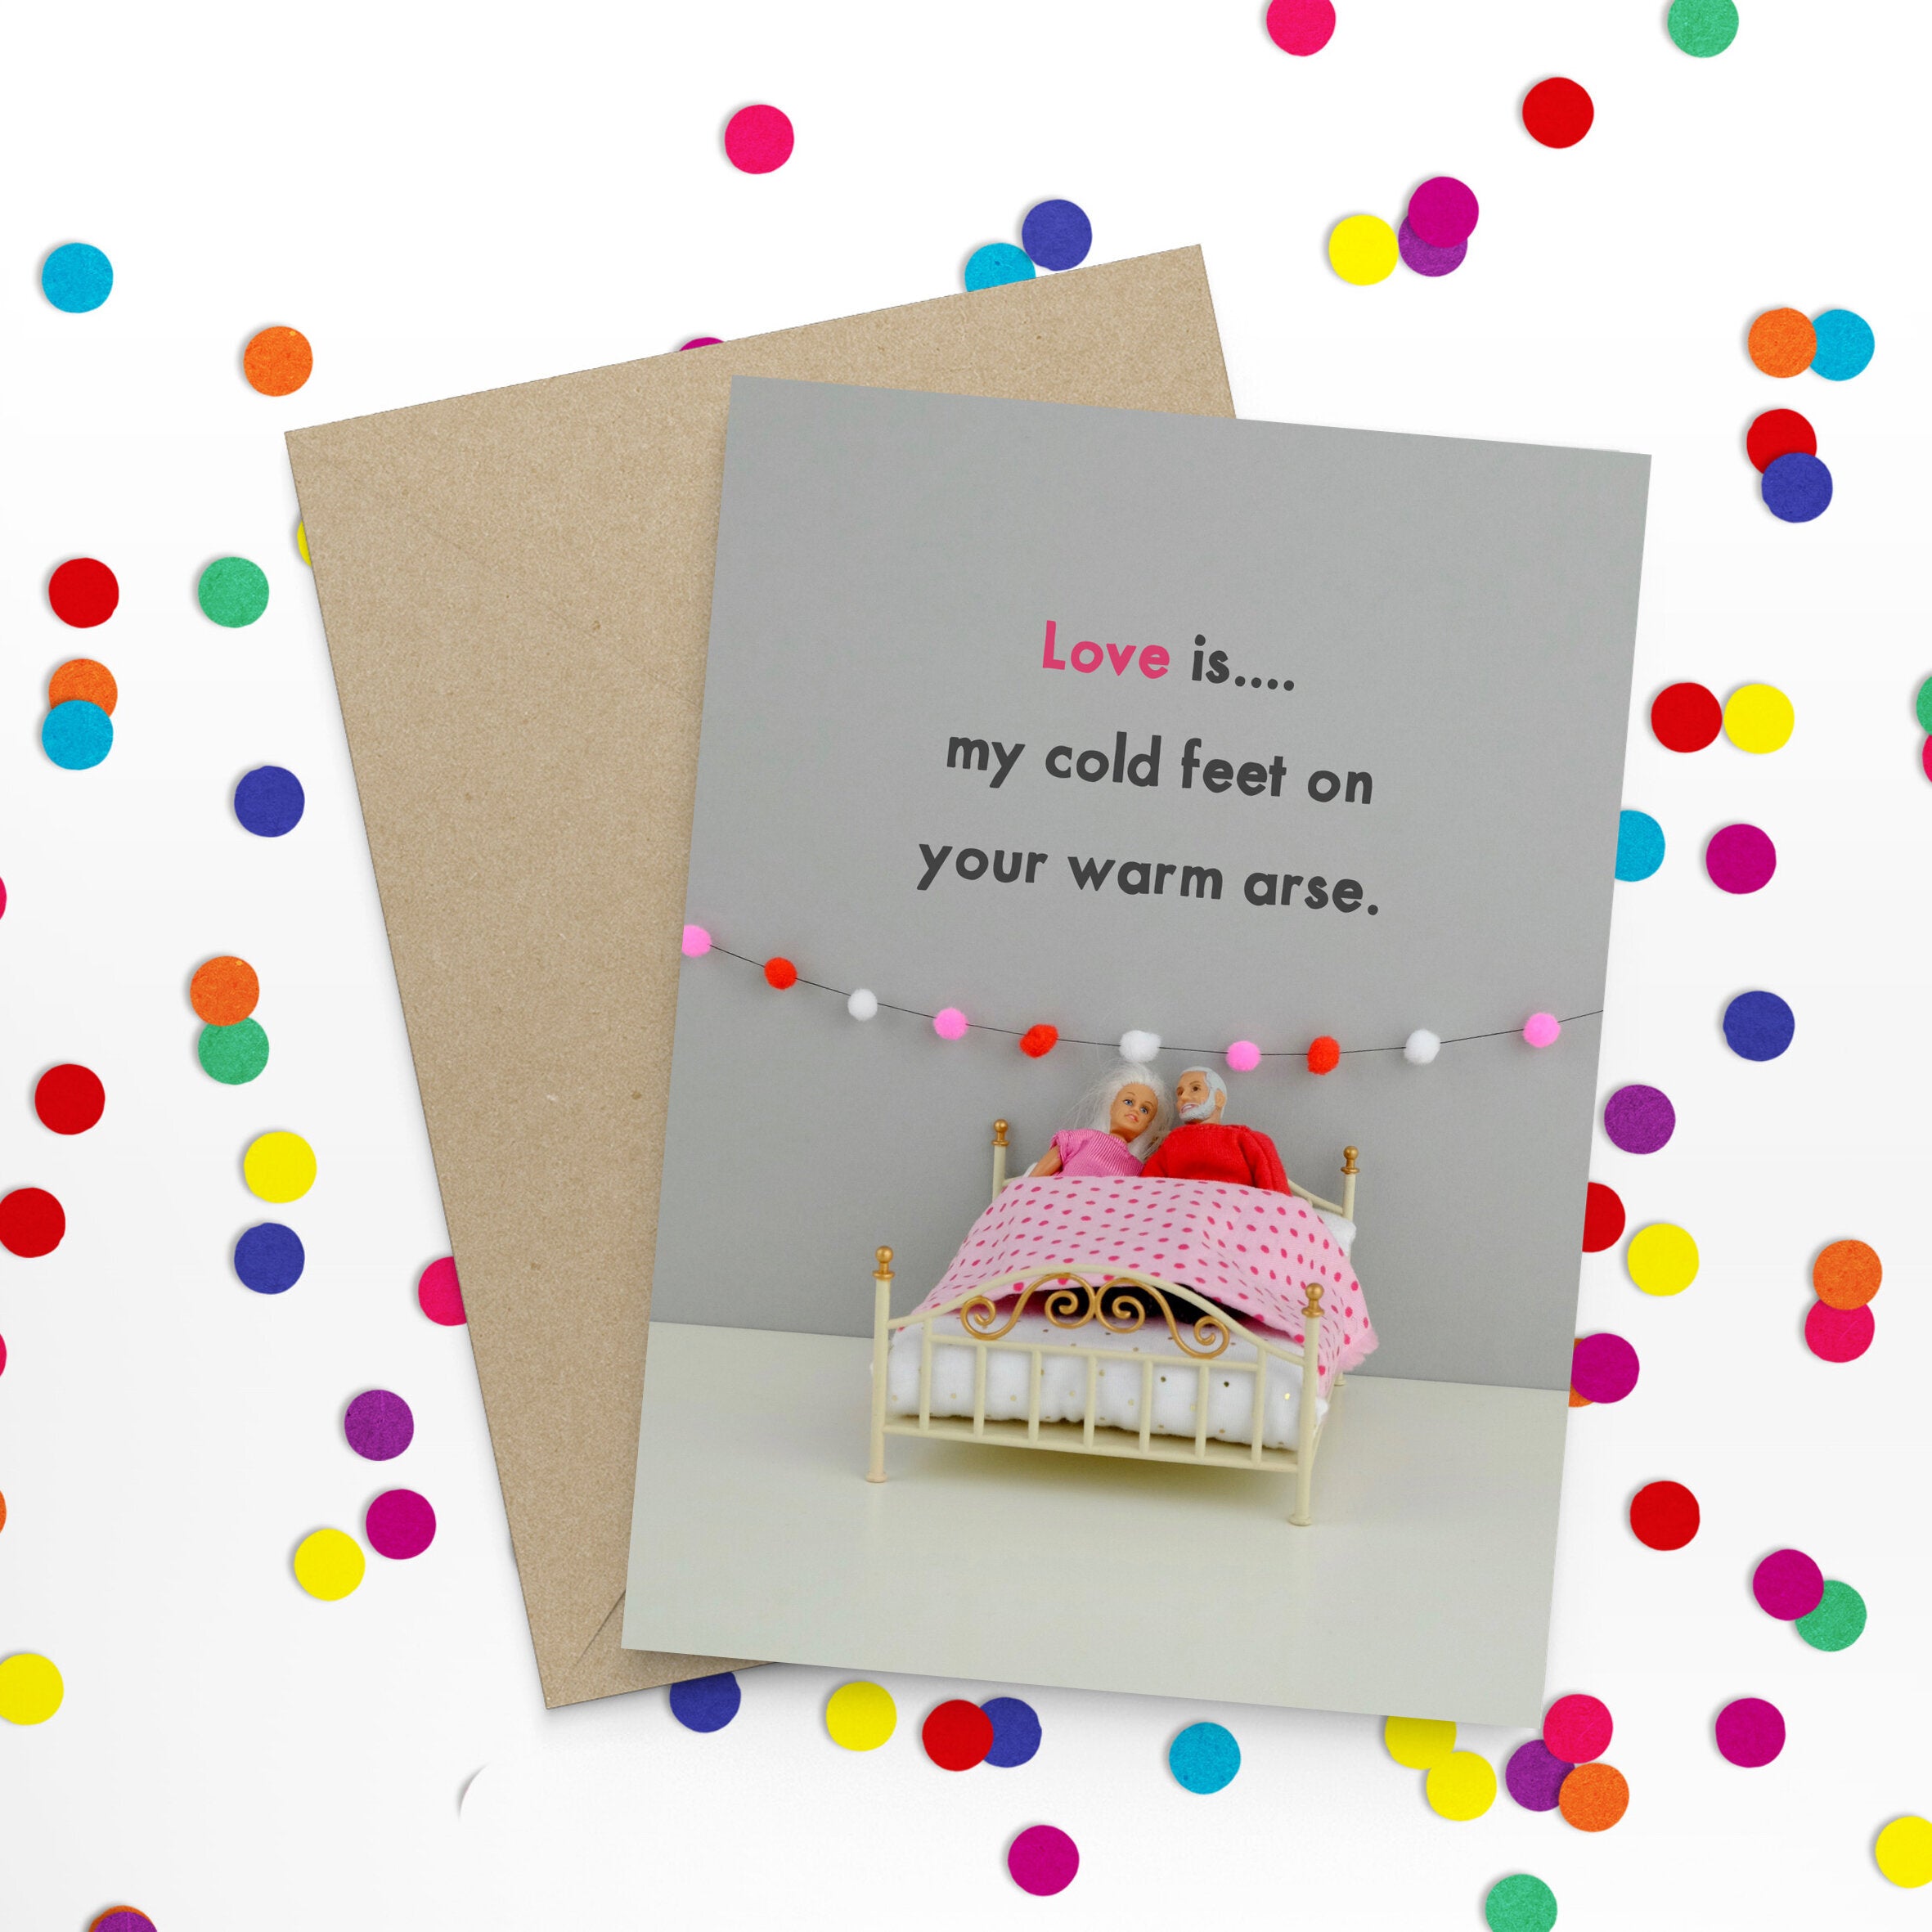 Love Is My Cold Feet On Your Warm Arse Greetings Card by Bold and Bright